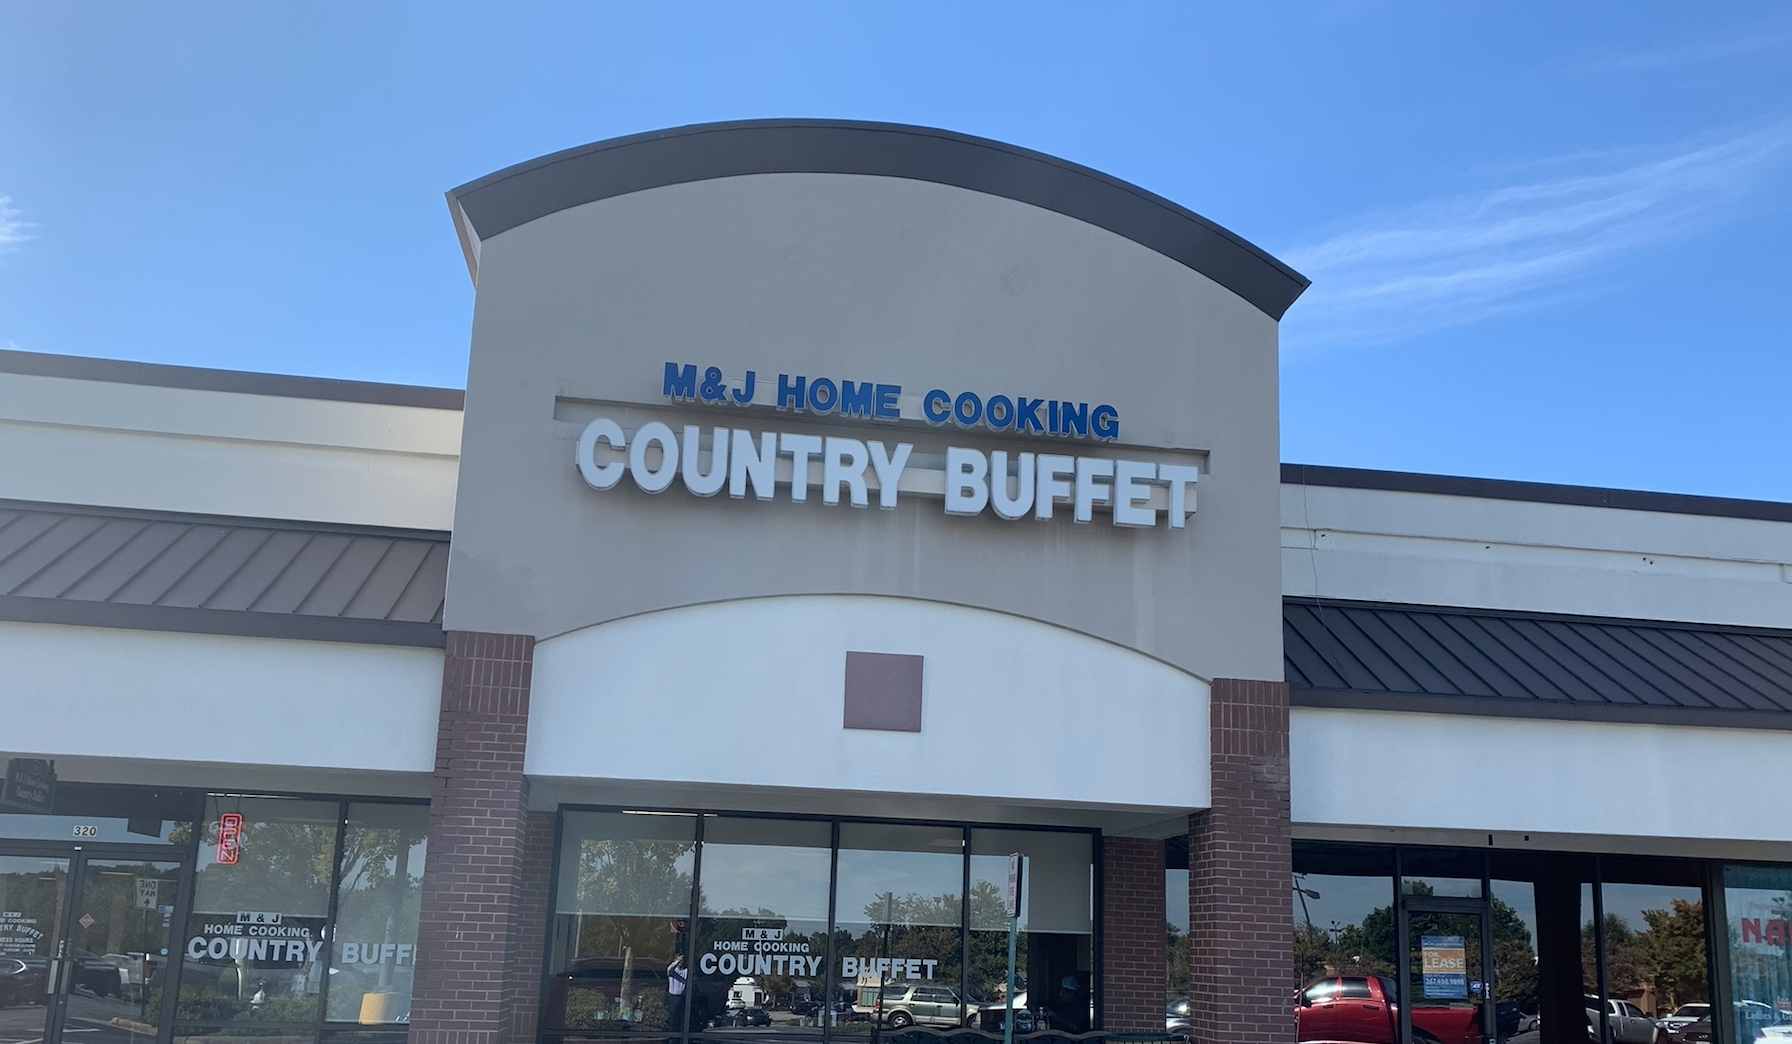 M&J Home Cooking